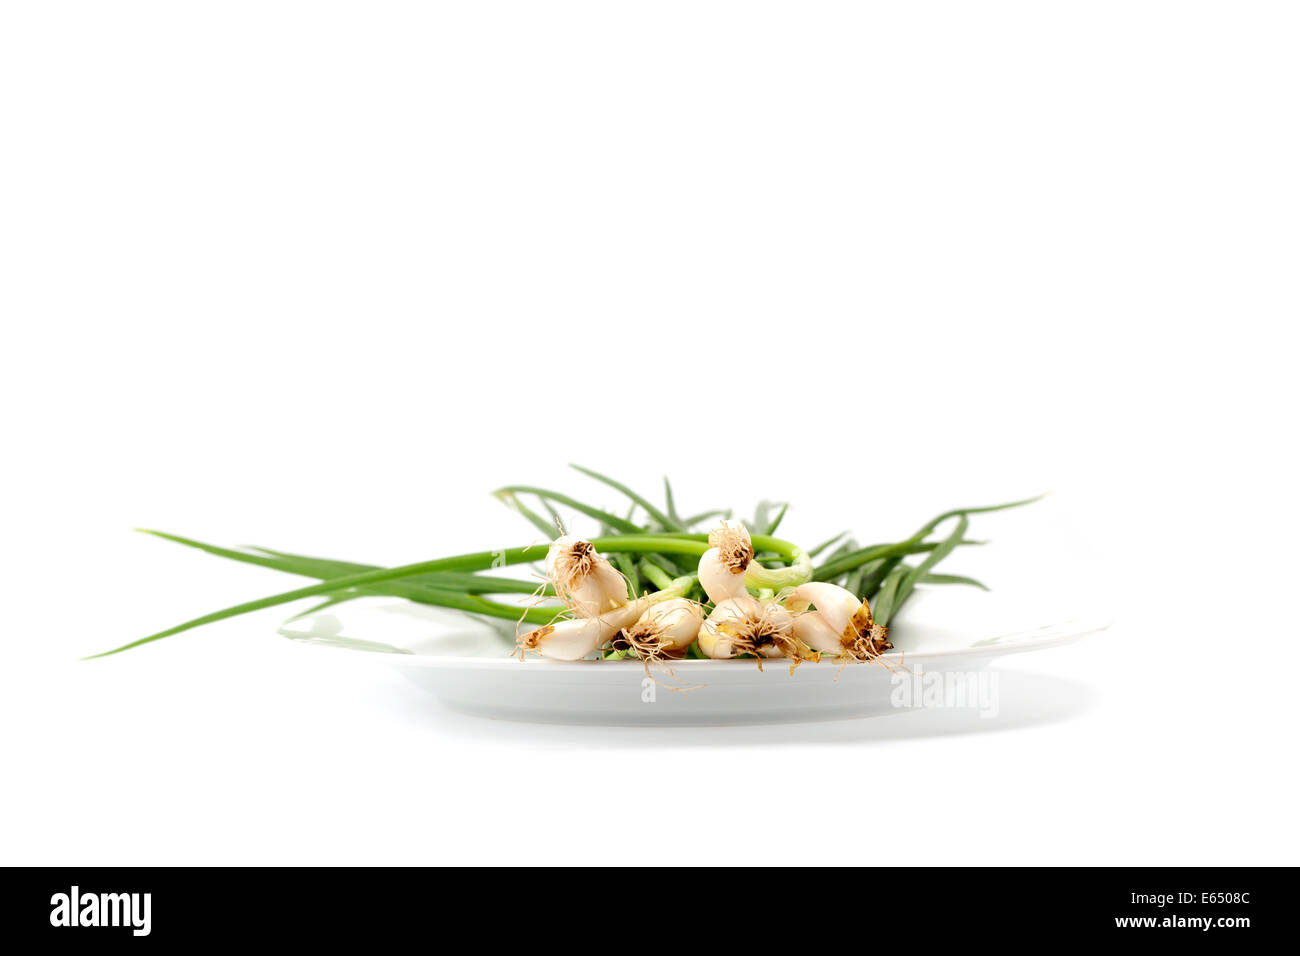 spring onion or chive isolated o white background Stock Photo